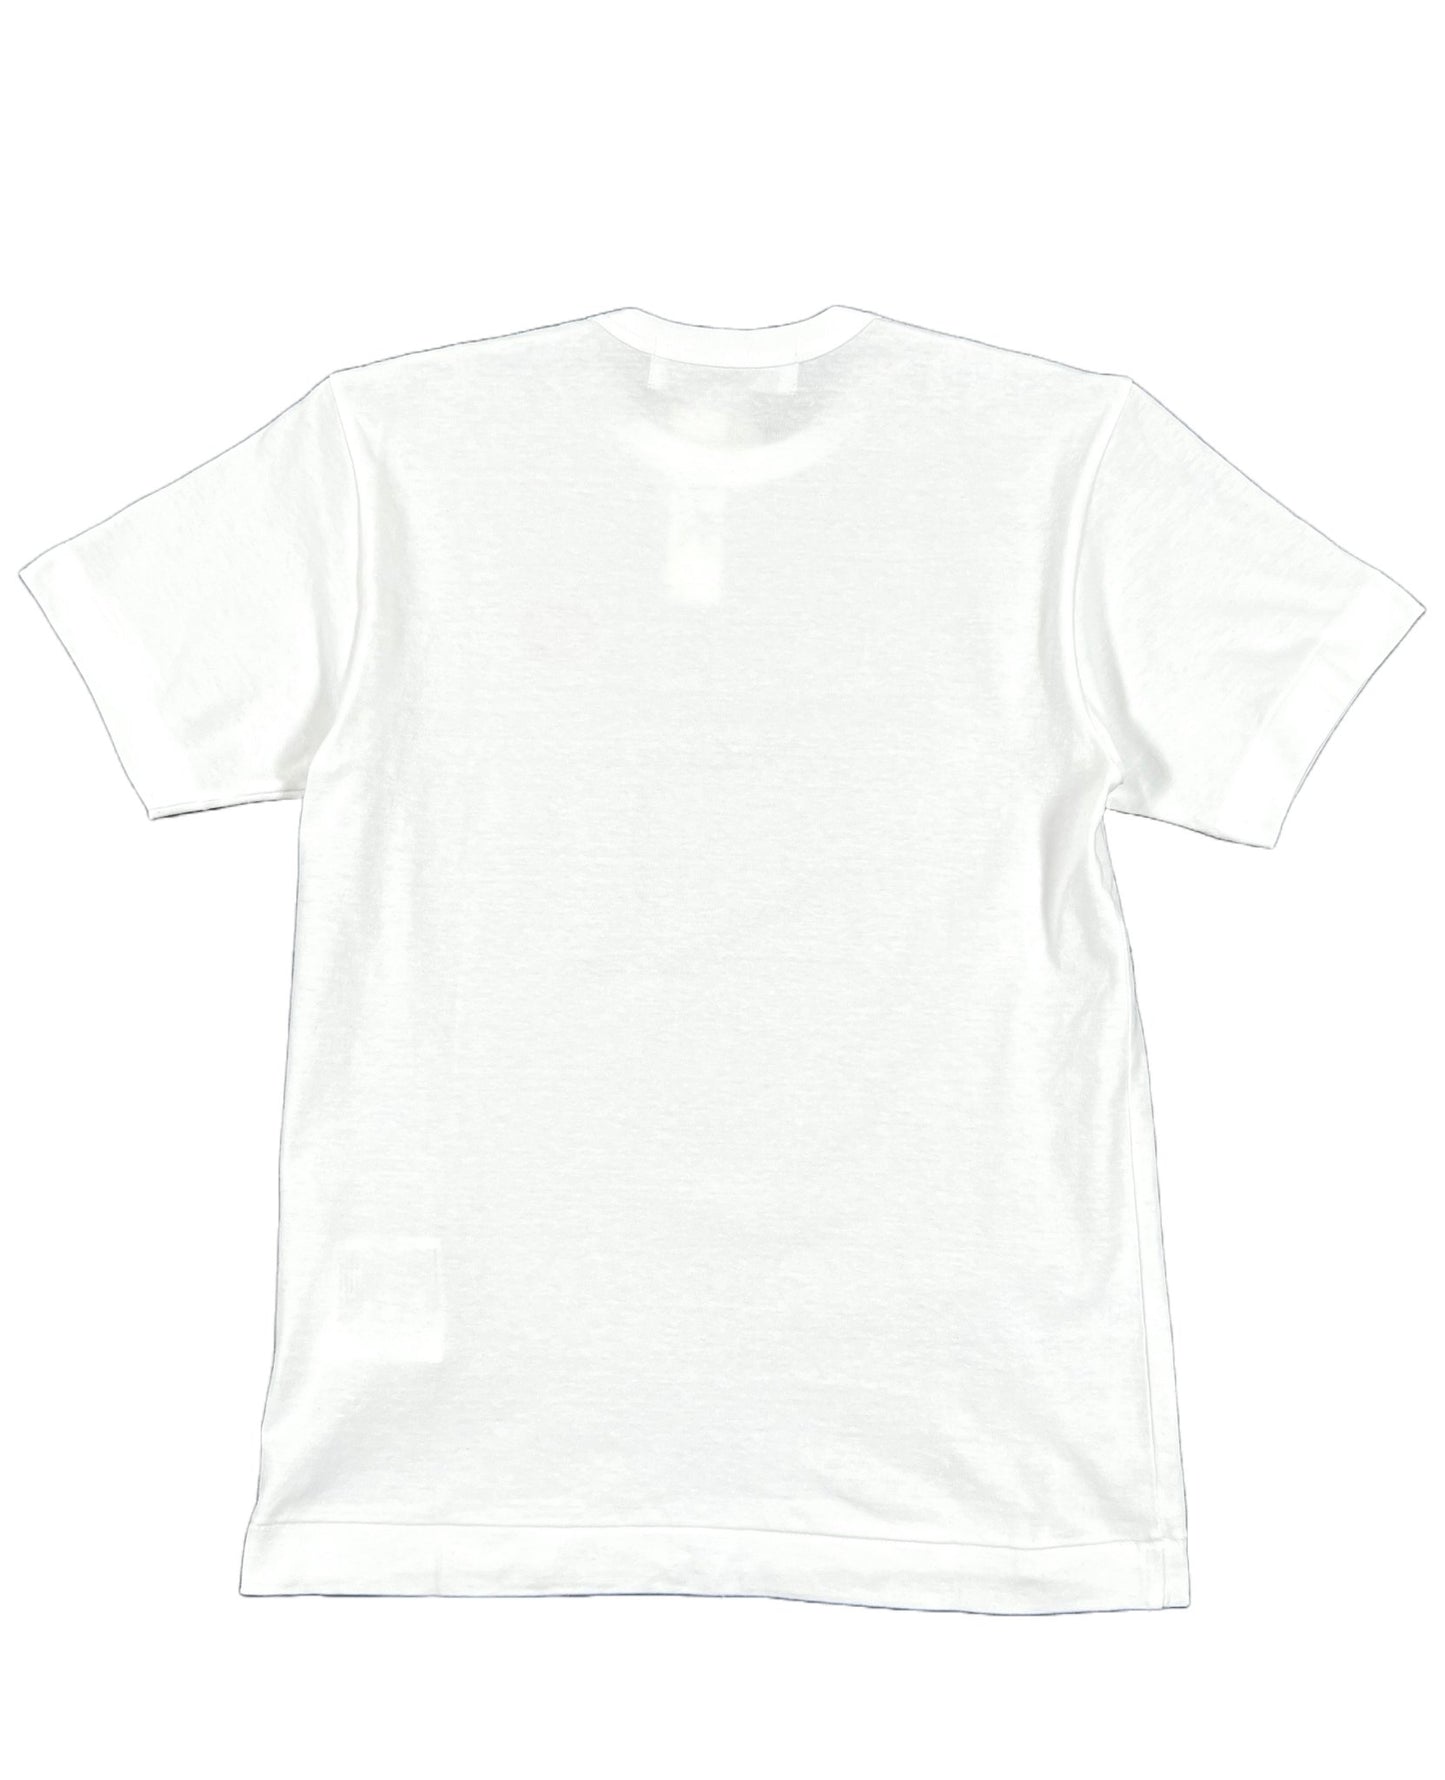 A white DSQUARED2 S71GD1058 COOL TEE WHITE graphic t-shirt on a white background.